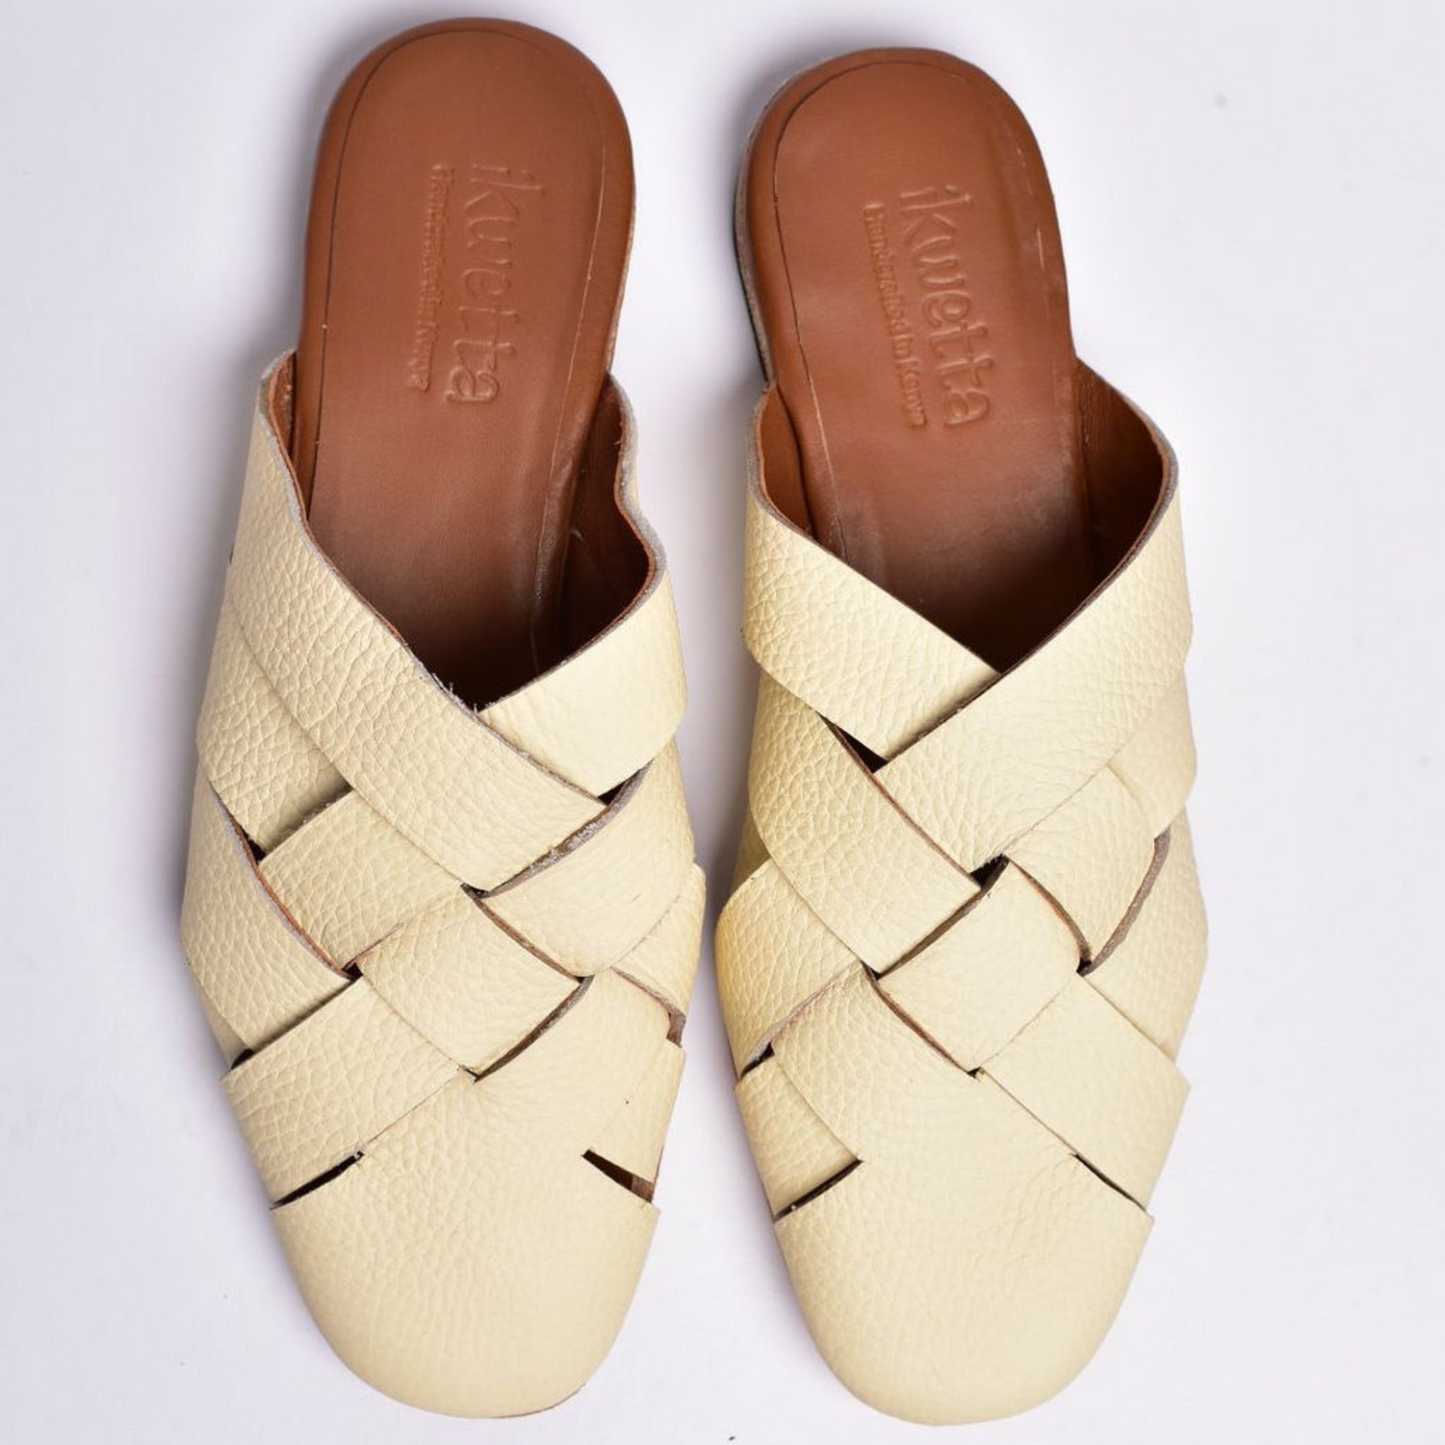 Roman mules in vanilla milled leather